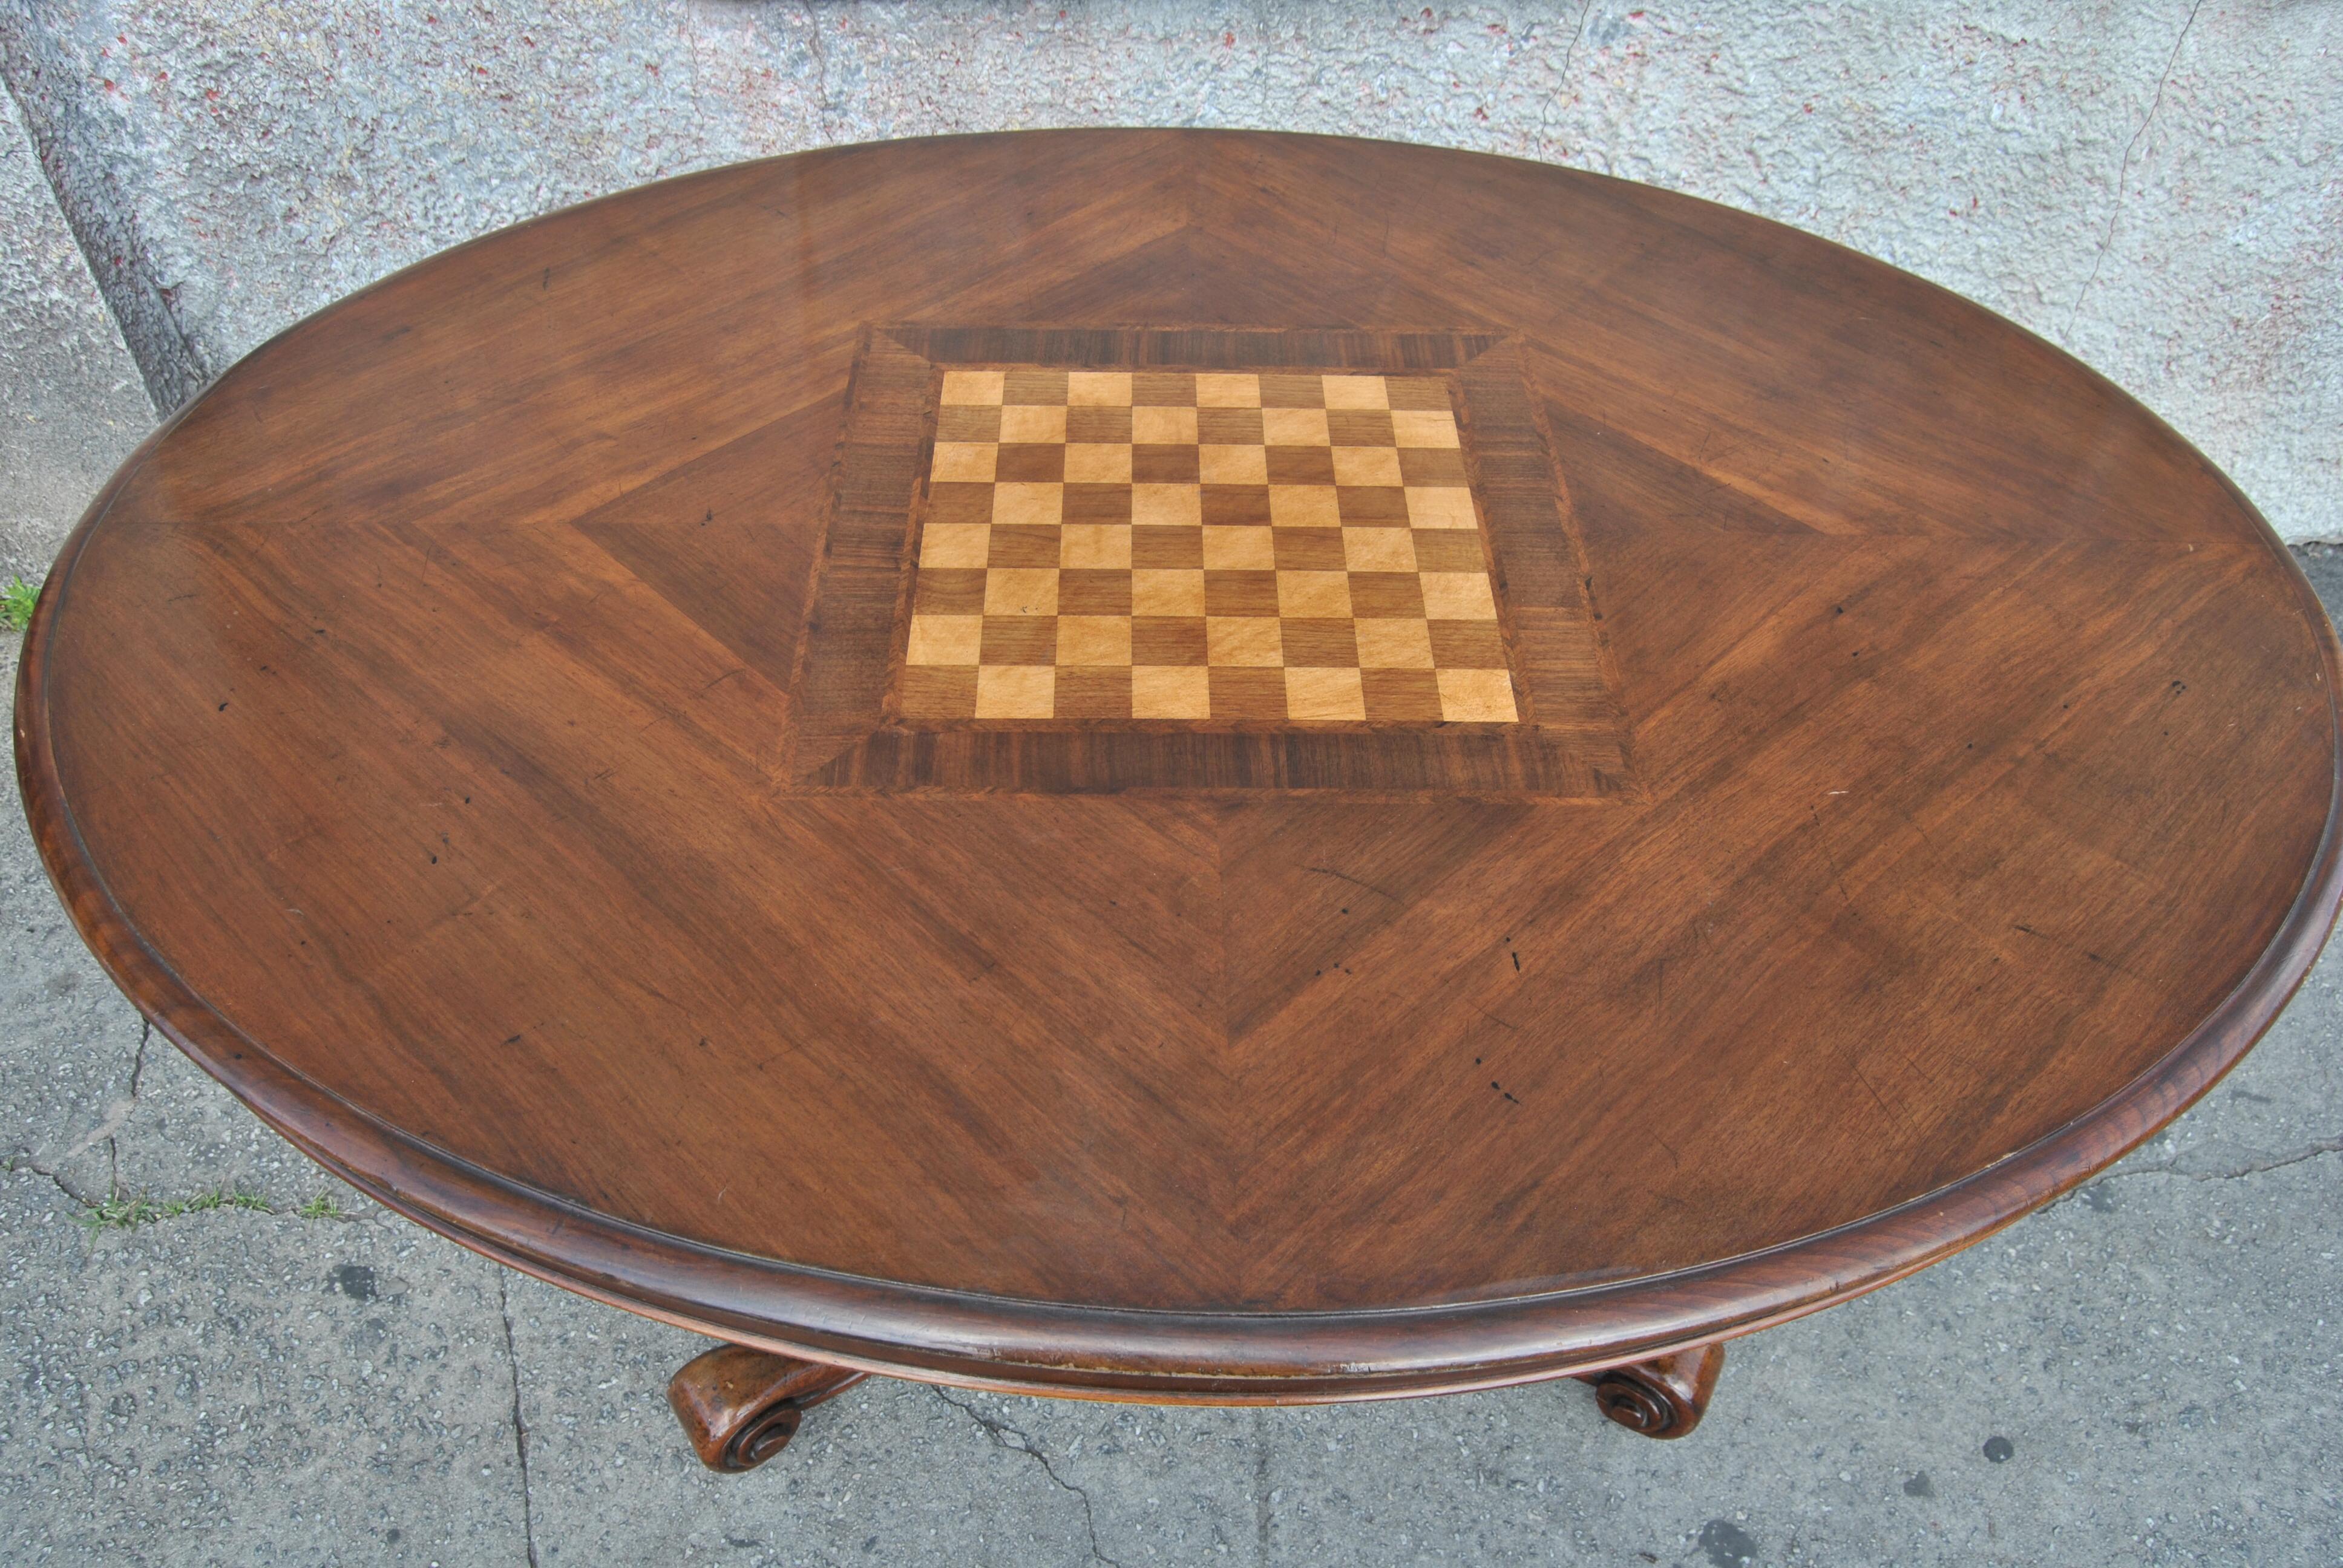 This is a walnut tilt-top table / games table / chess table / breakfast table made in England, circa 1860. The top has a beautiful grained walnut set in quarters with a games / chess board to the middle. There is an inlaid herringbone walnut banding